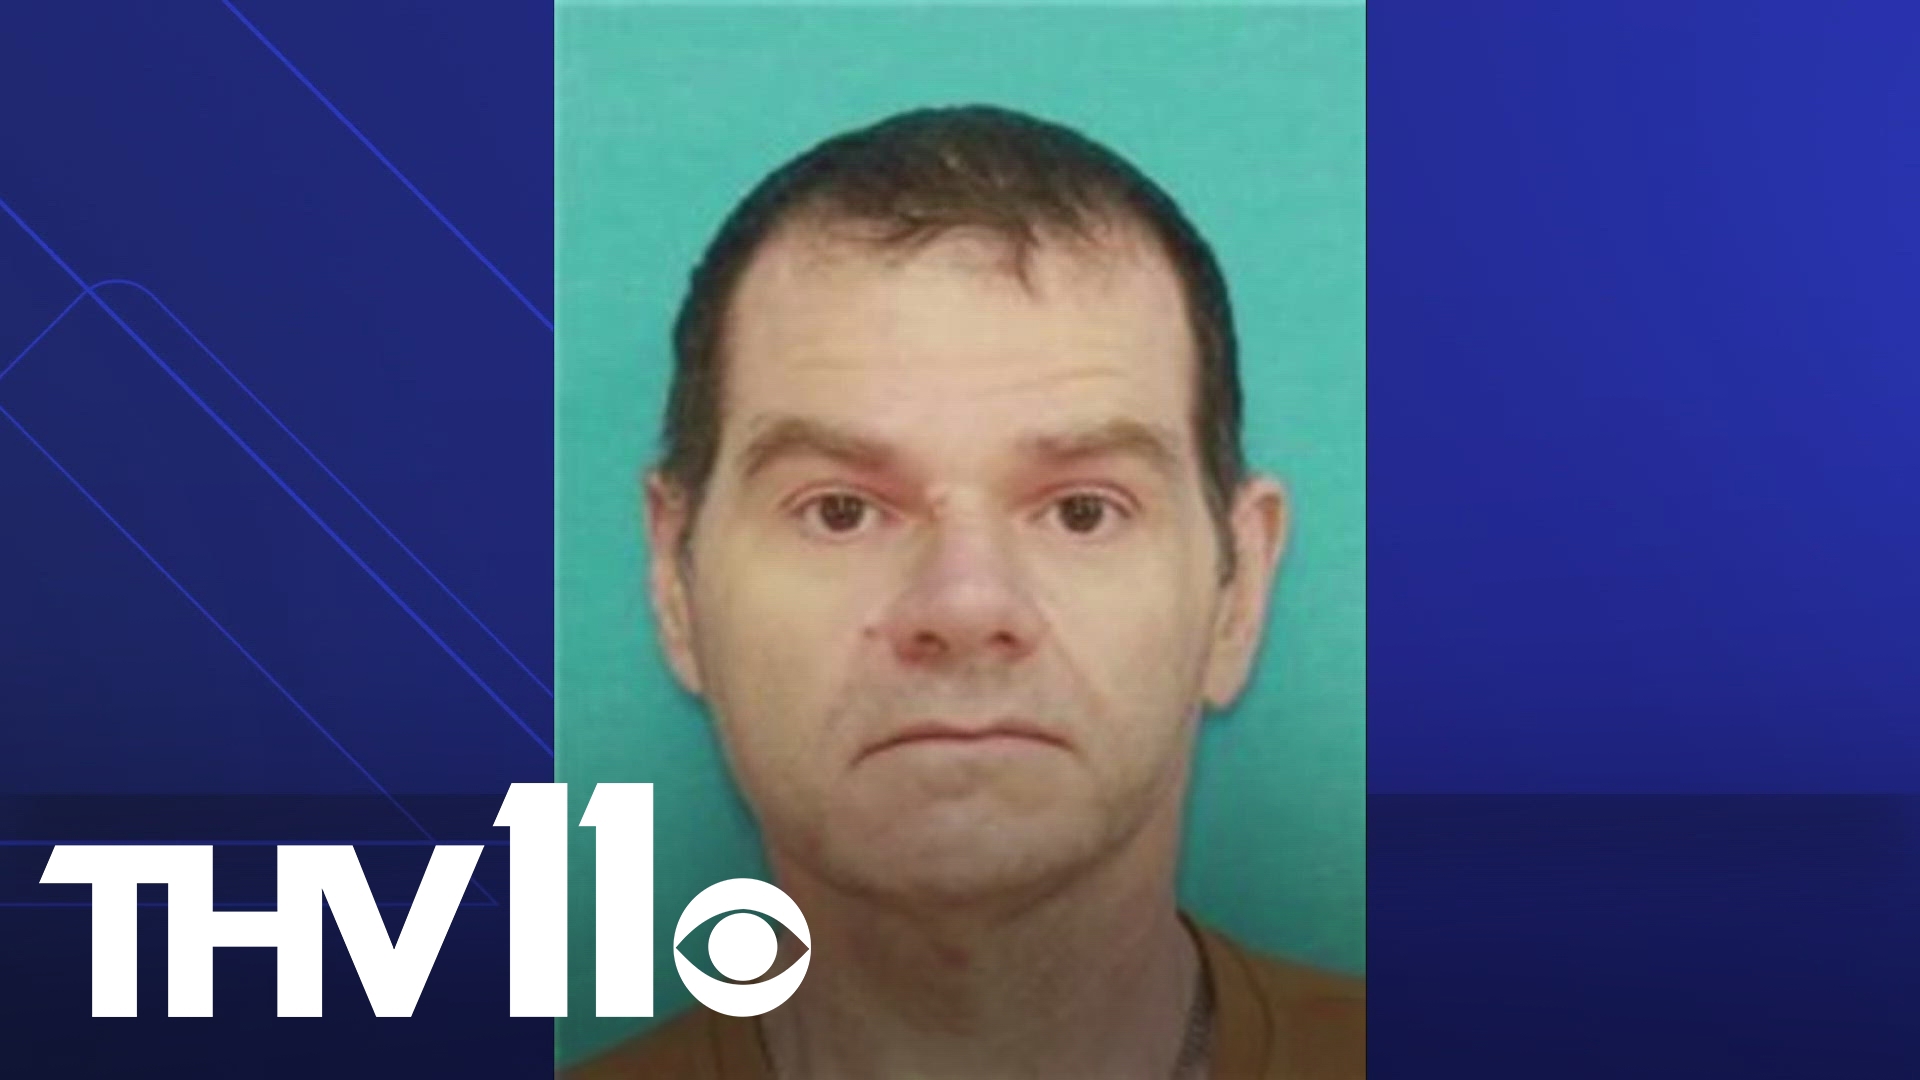 The search for an Oklahoma murder suspect continues after authorities said he was last seen in Morrilton, Arkansas.